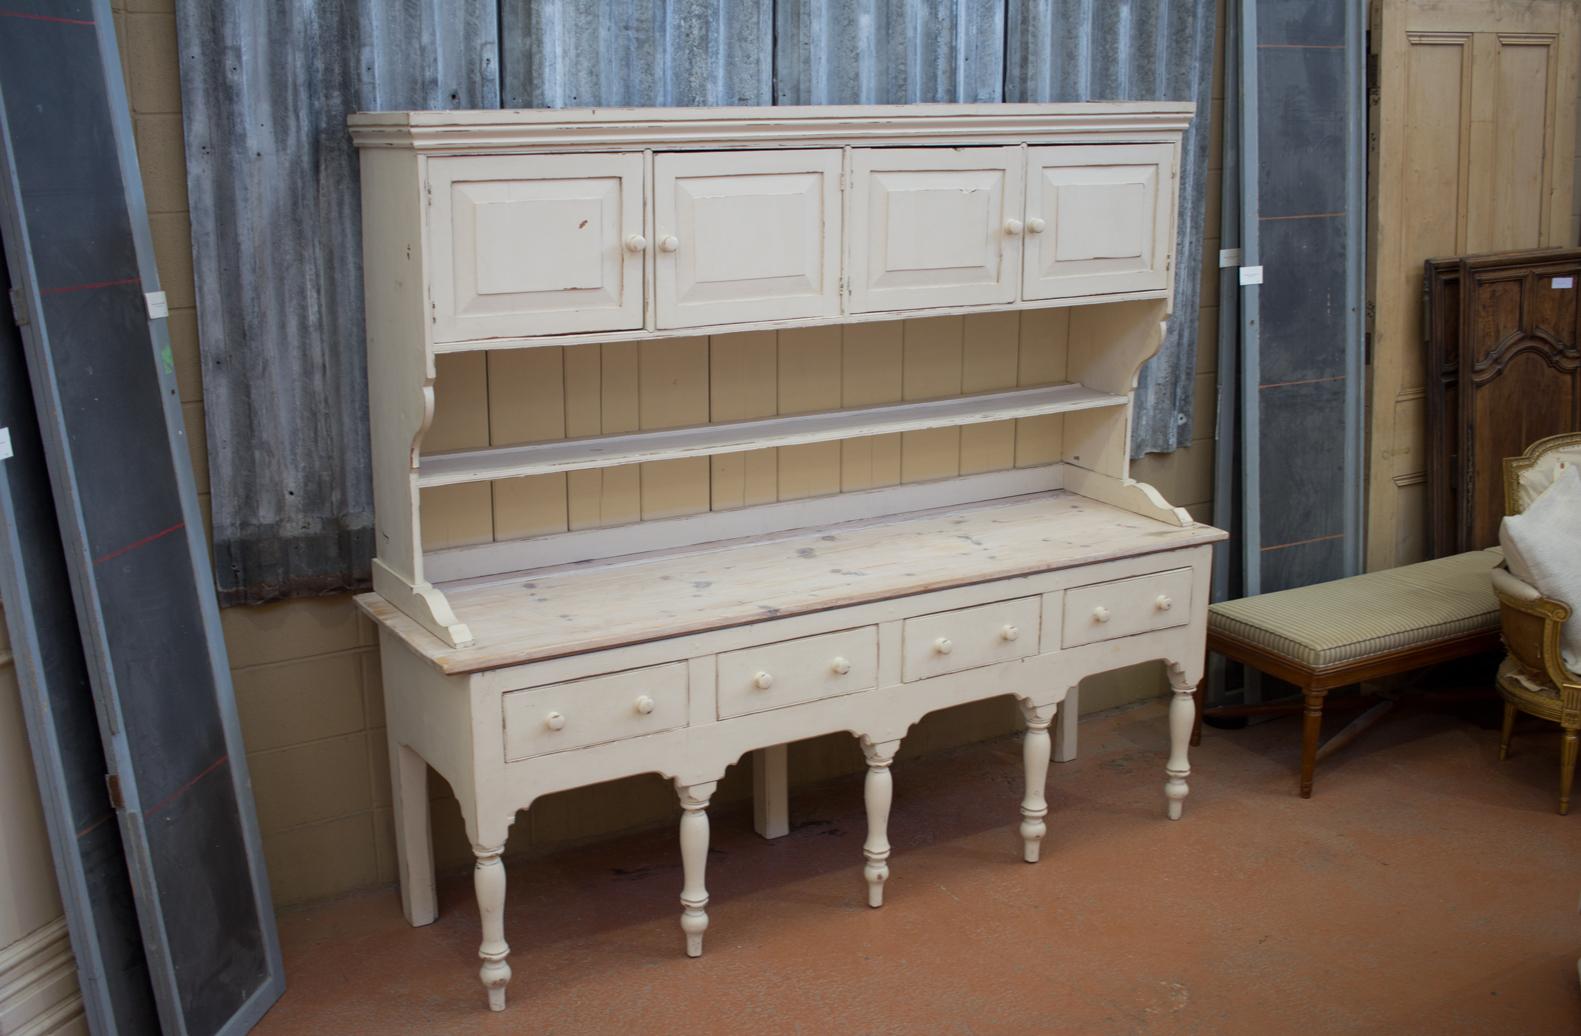 Vintage early 20th century Welsh painted dresser/kitchen cupboard. Dresser base sits on five turned legs with four drawers. The dresser top is slat back with a pot shelf and two double doors above. Great size and very quaint.